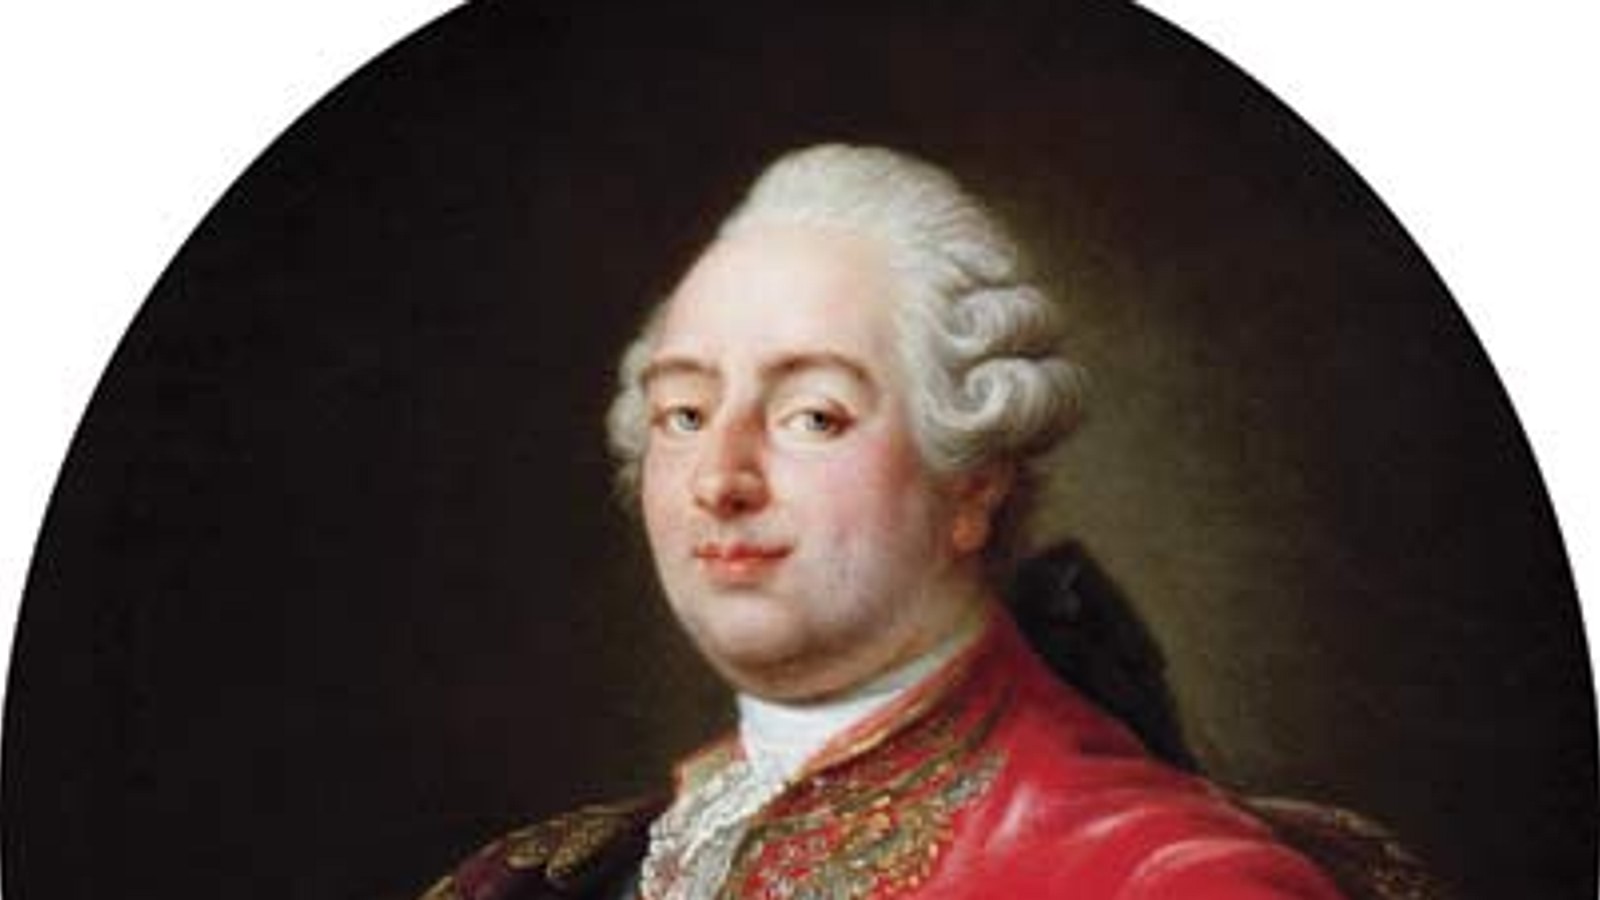 Remembering His Majesty the Late King Louis XVI of France.